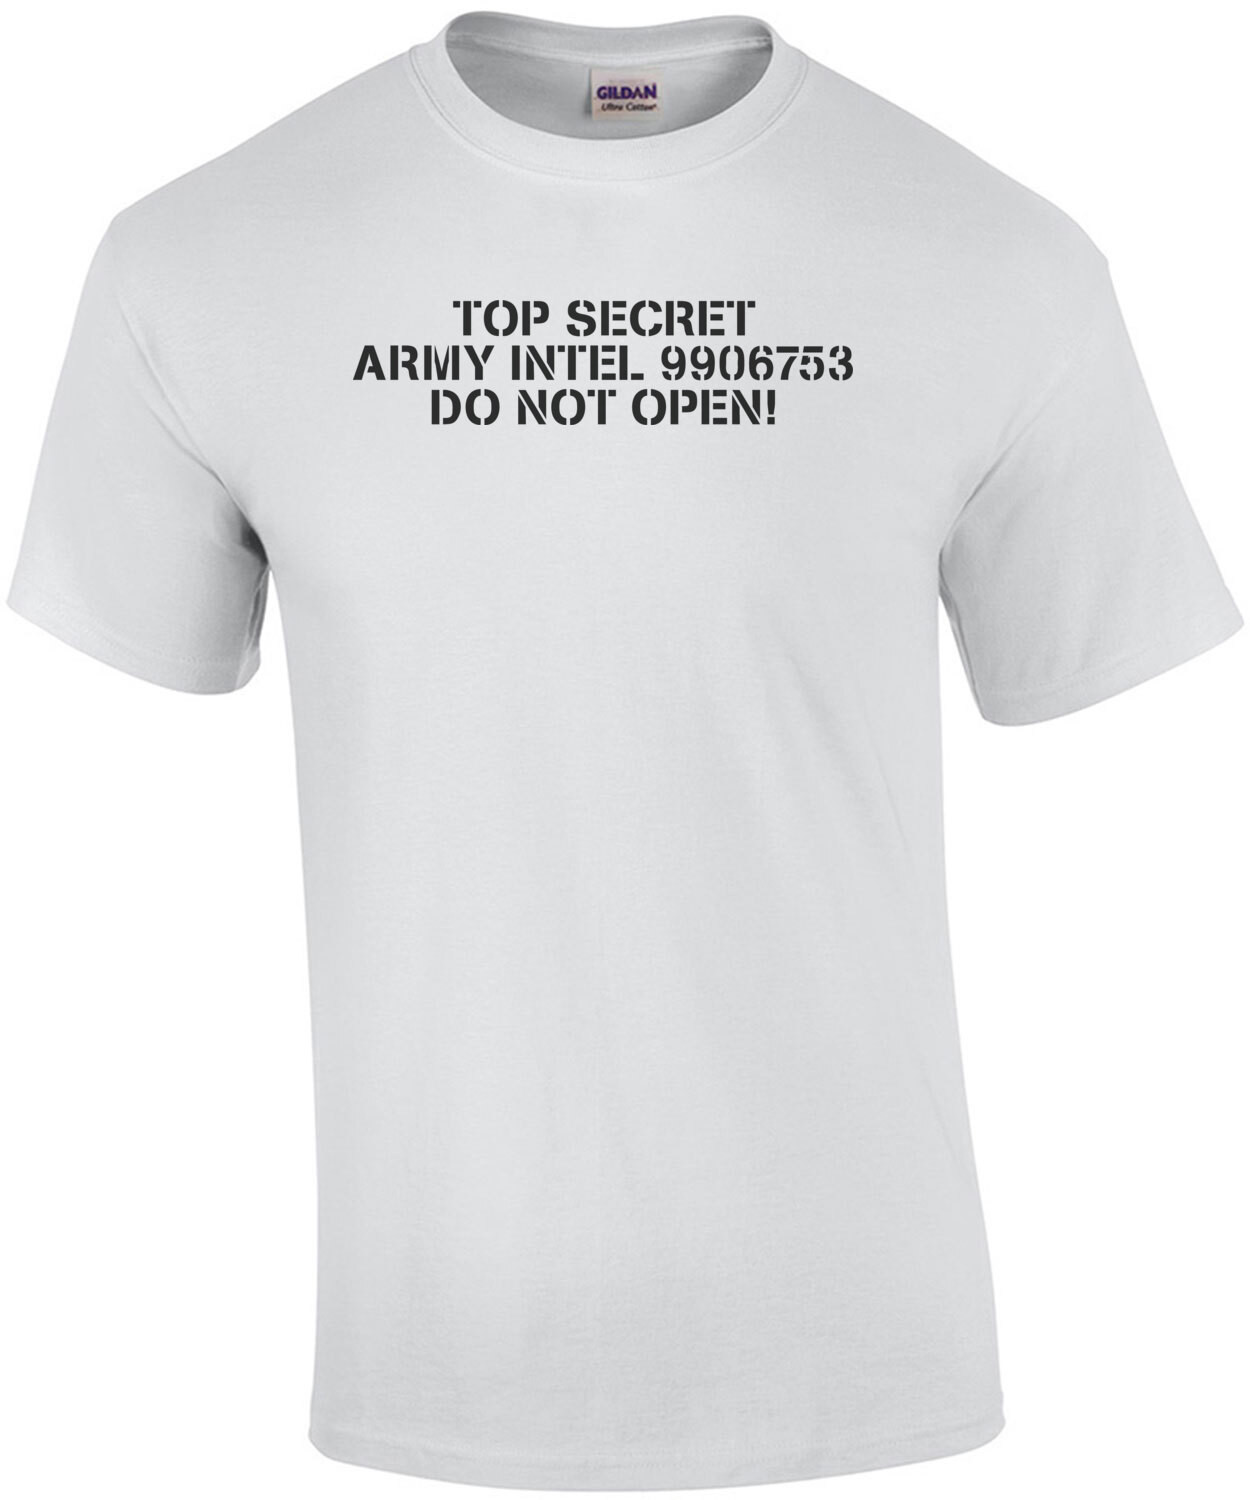 Top Secret Army Intel 9906753 Do Not Open - Indiana Jones - Raiders of the Lost Ark - 80's T-Shirt